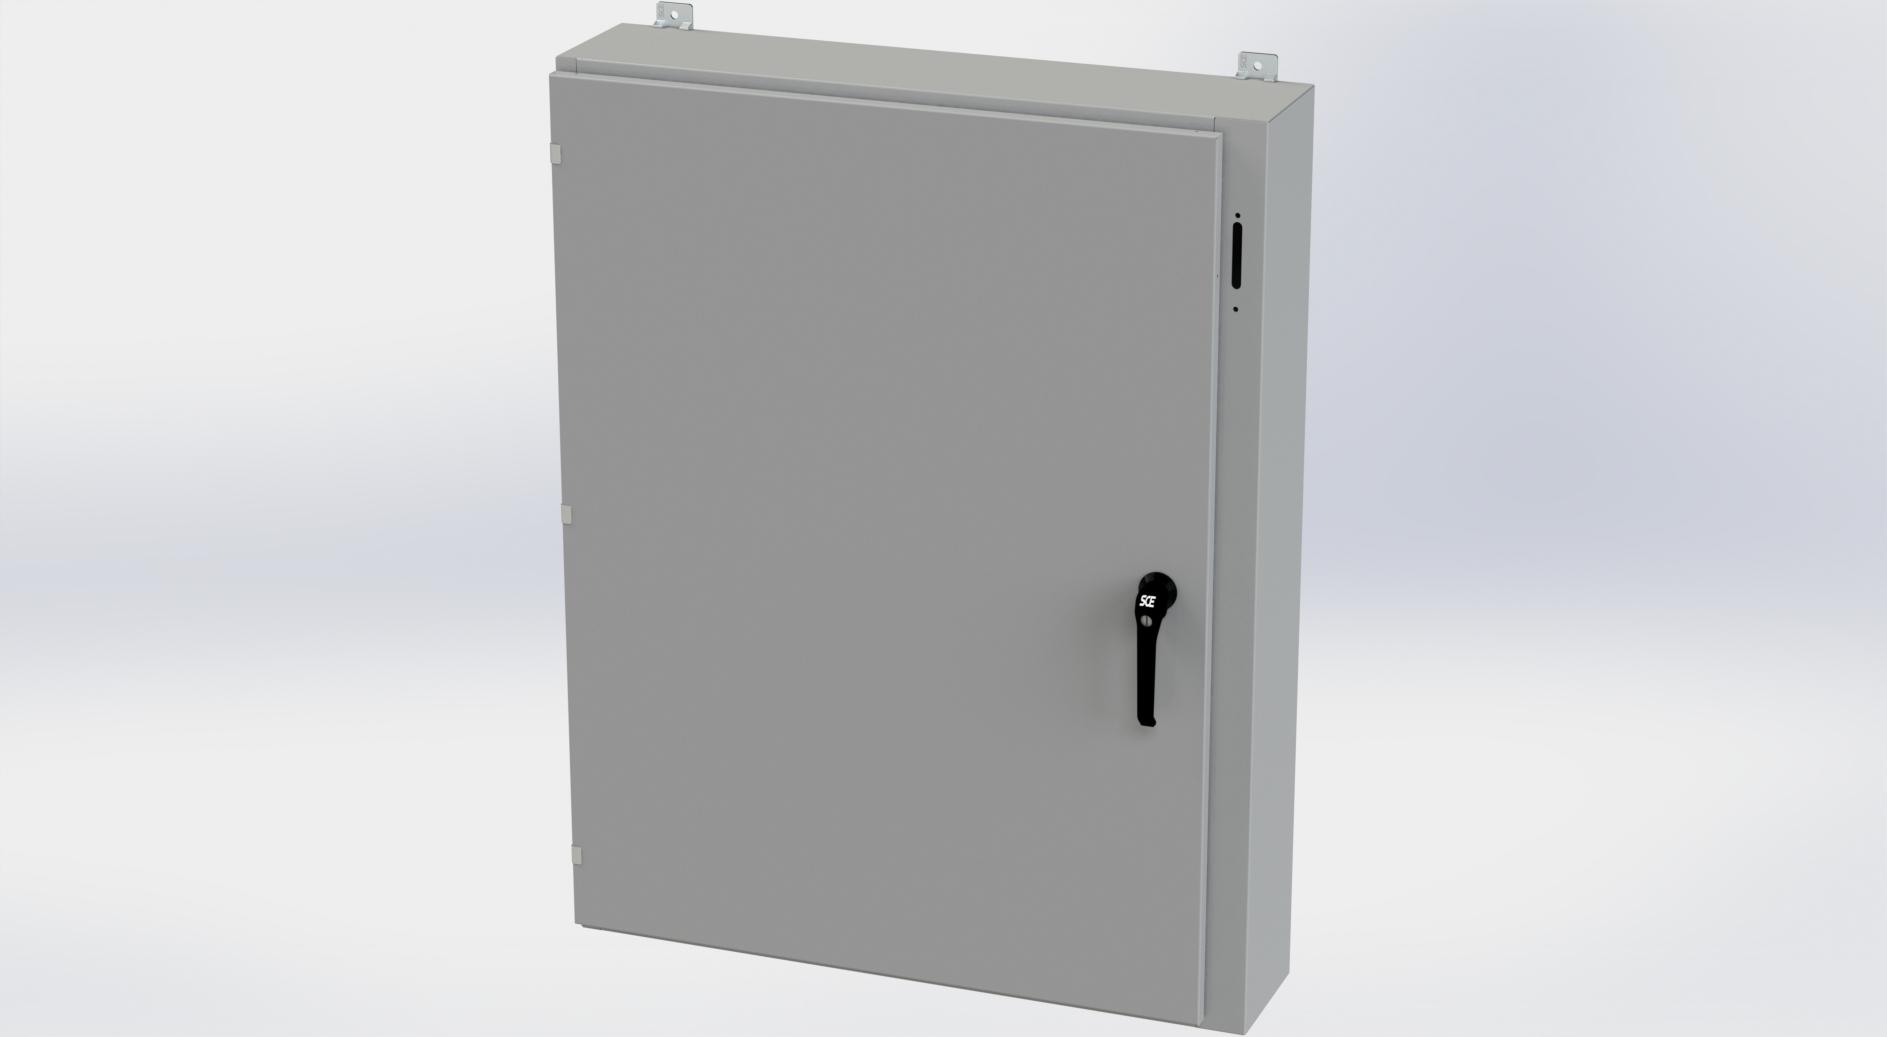 Saginaw Control SCE-48SA3808LPPL Obselete Use SCE-48XEL3708LP, Height:48.00", Width:37.38", Depth:8.00", ANSI-61 gray powder coating inside and out. Optional sub-panels are powder coated white.